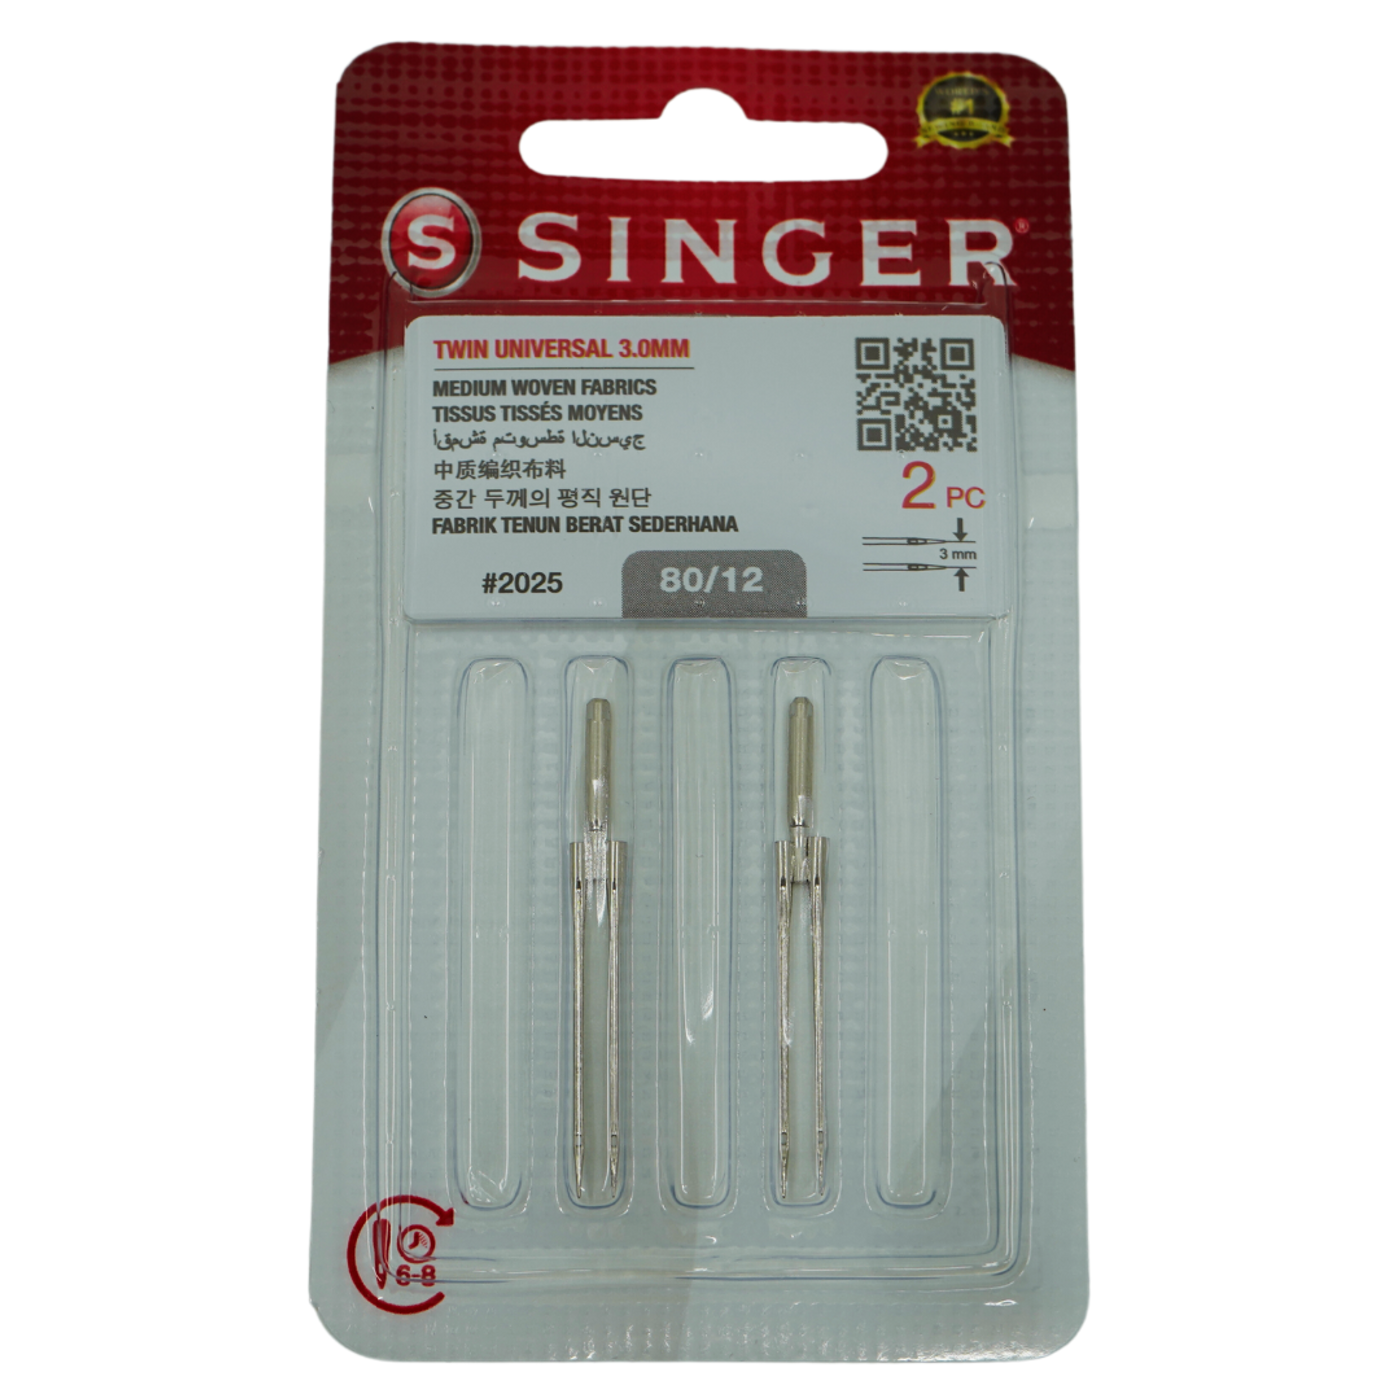 Singer Heavy Duty 4423 36 How to Thread a Twin Needle 